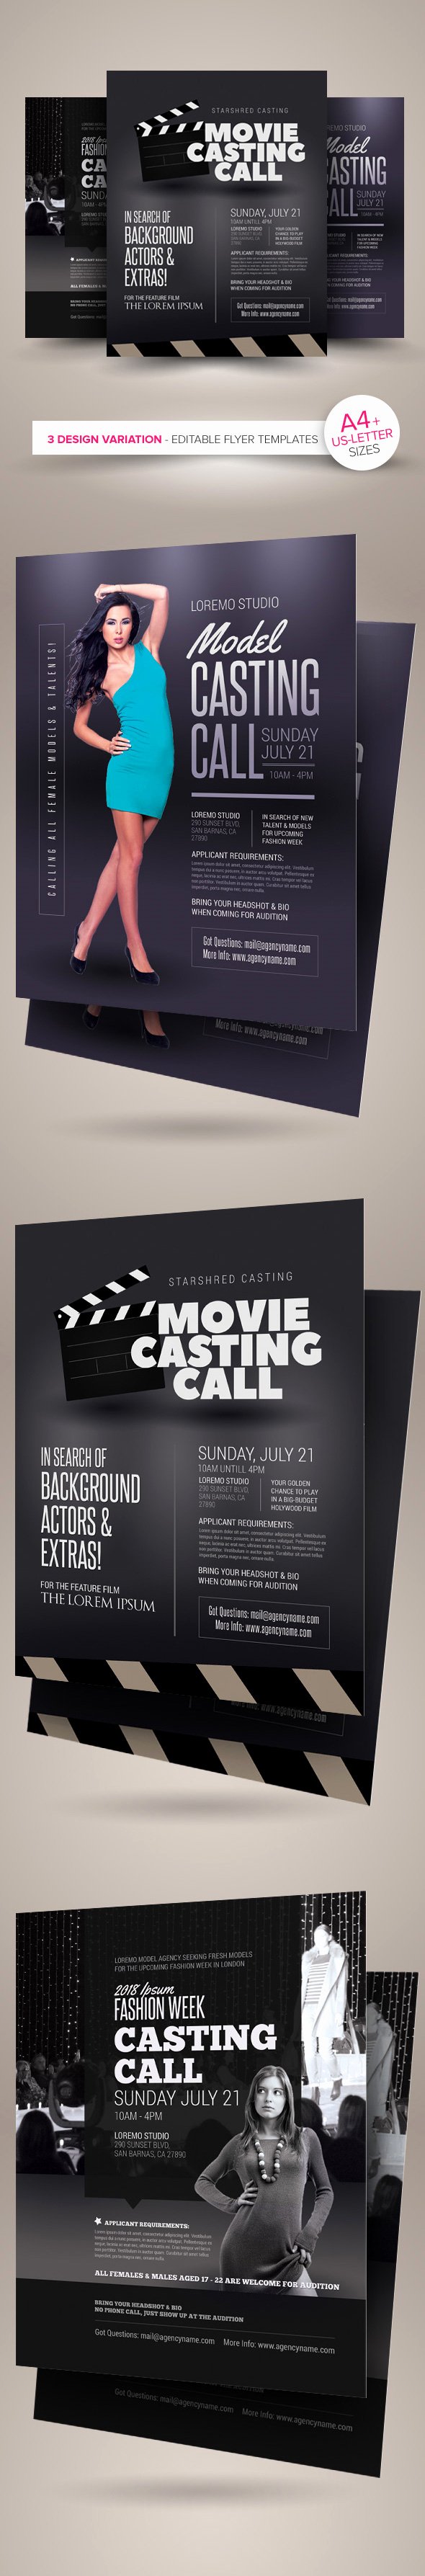 Casting Call Flyer Template Luxury Casting Call Flyer Templates On Behance